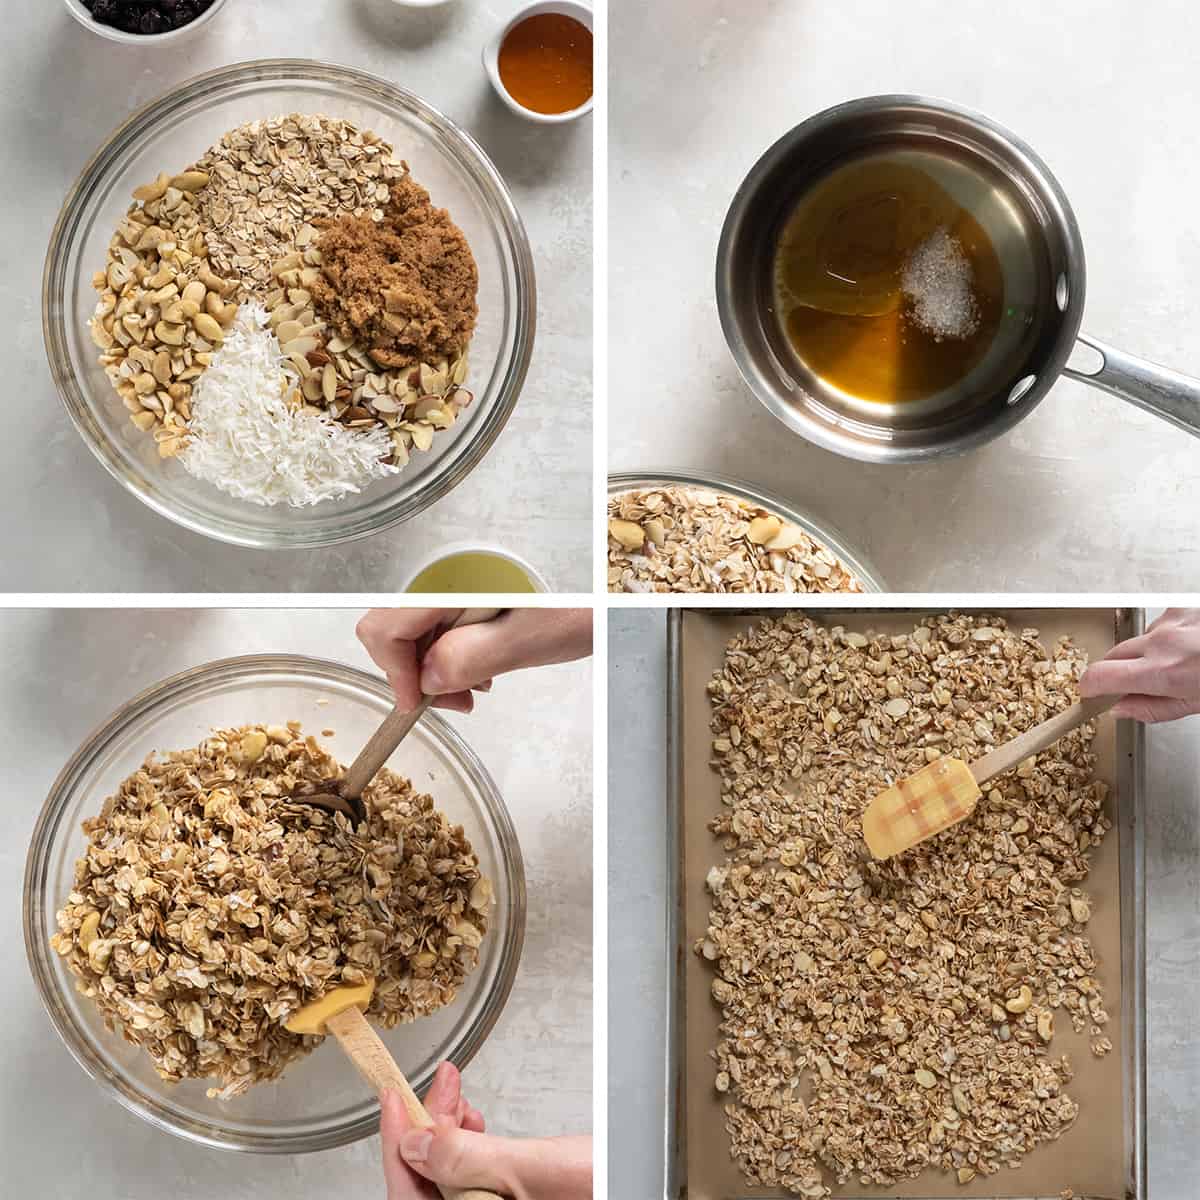 Four images of granola ingredients being combined in a bowl and spread on a baking sheet.